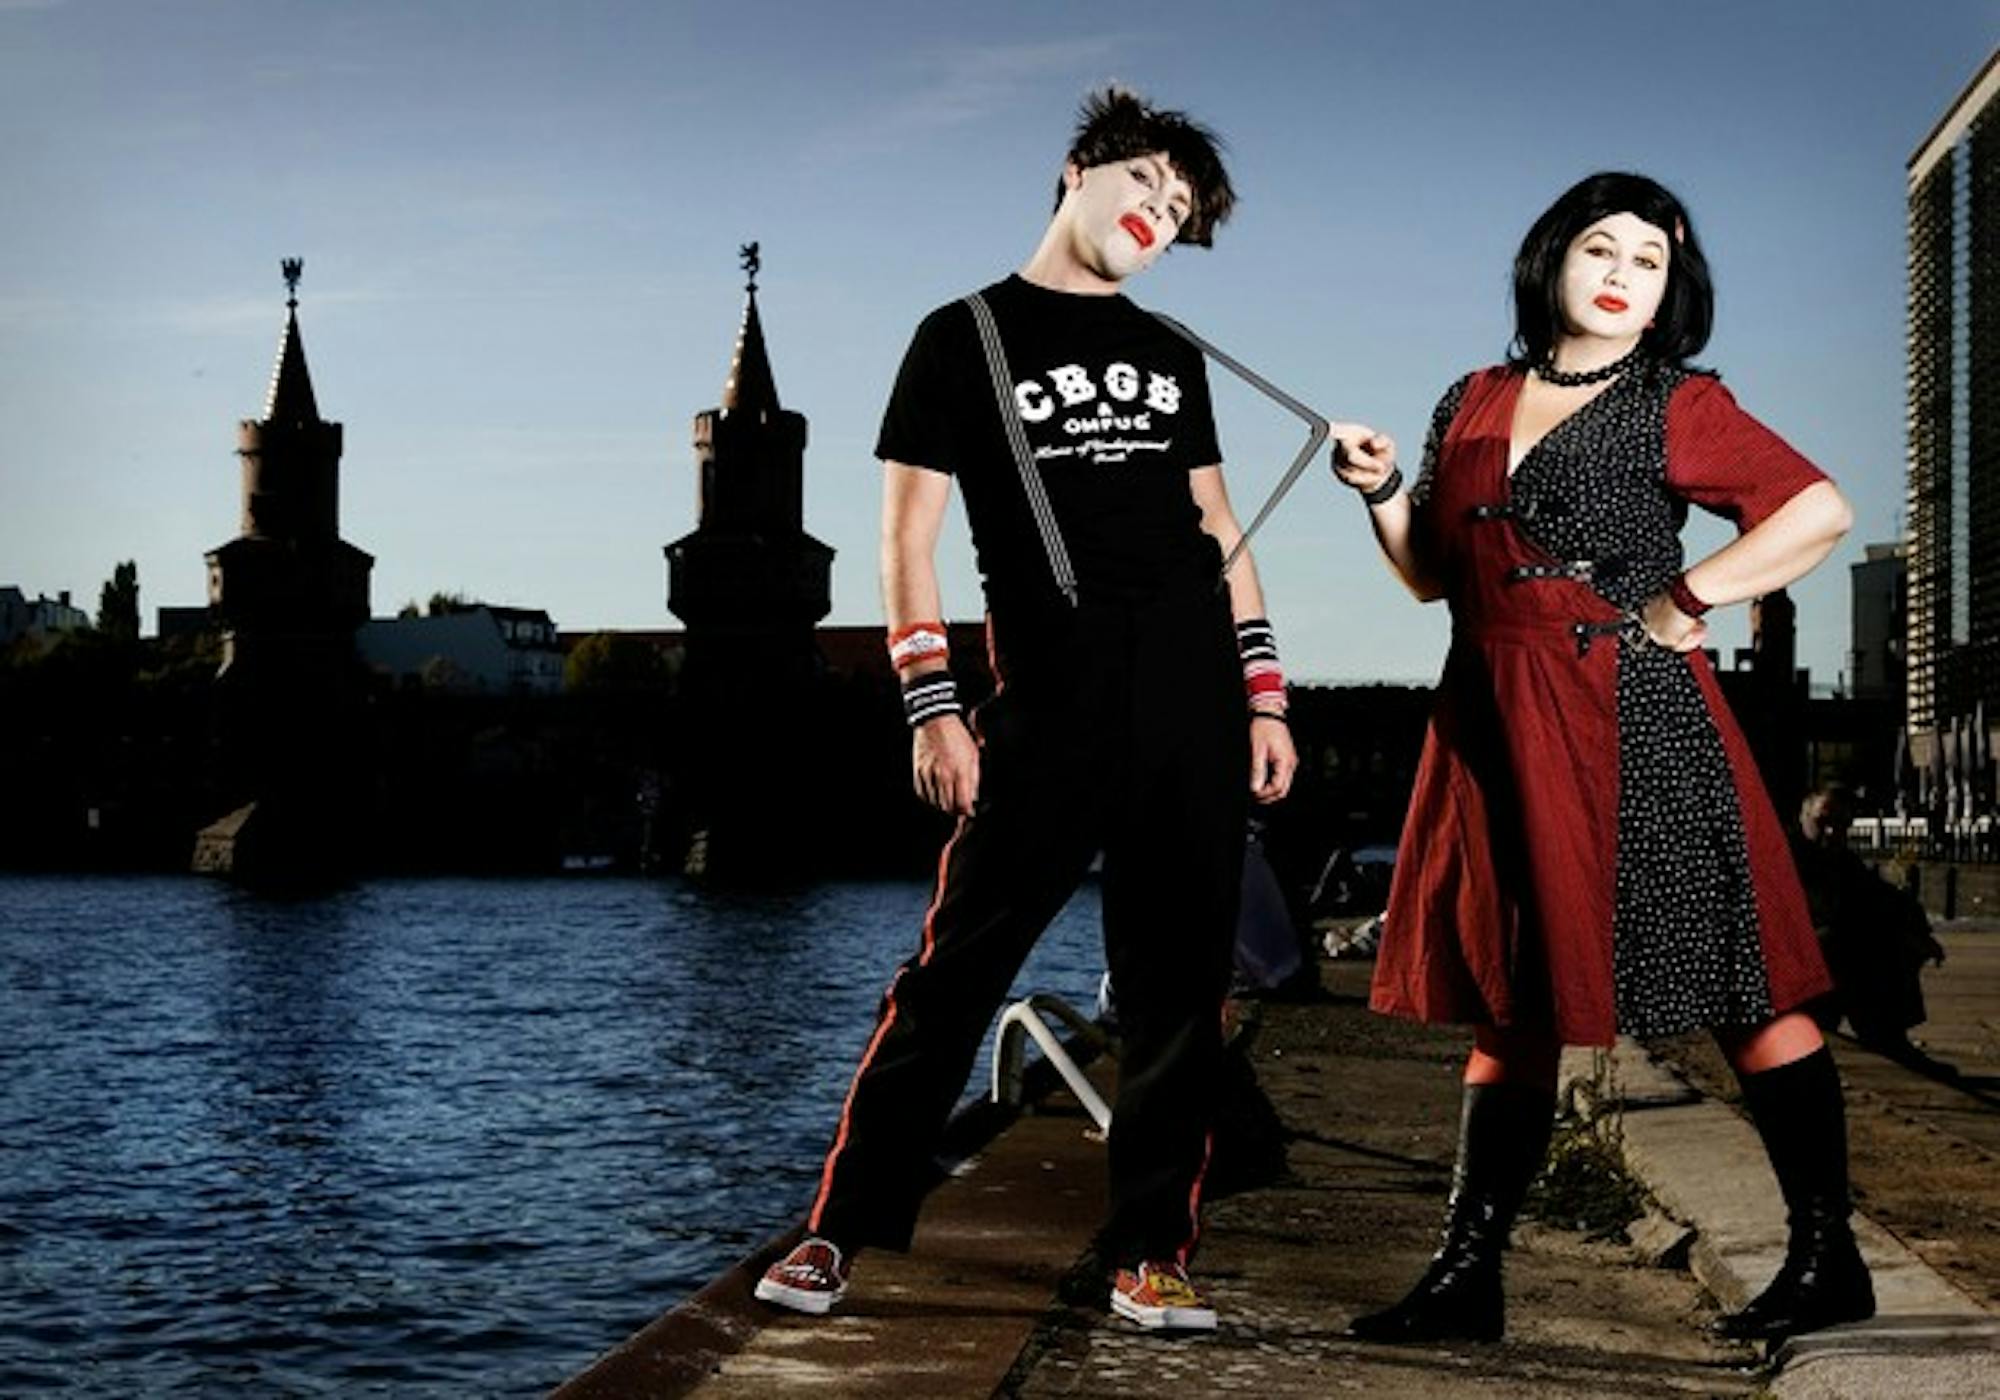 Daniel Tobias and Clare Bartholomew perform as German siblings Otto and Astrid Rot in Die Roten Punkte, an indie rock band with punk attitude.